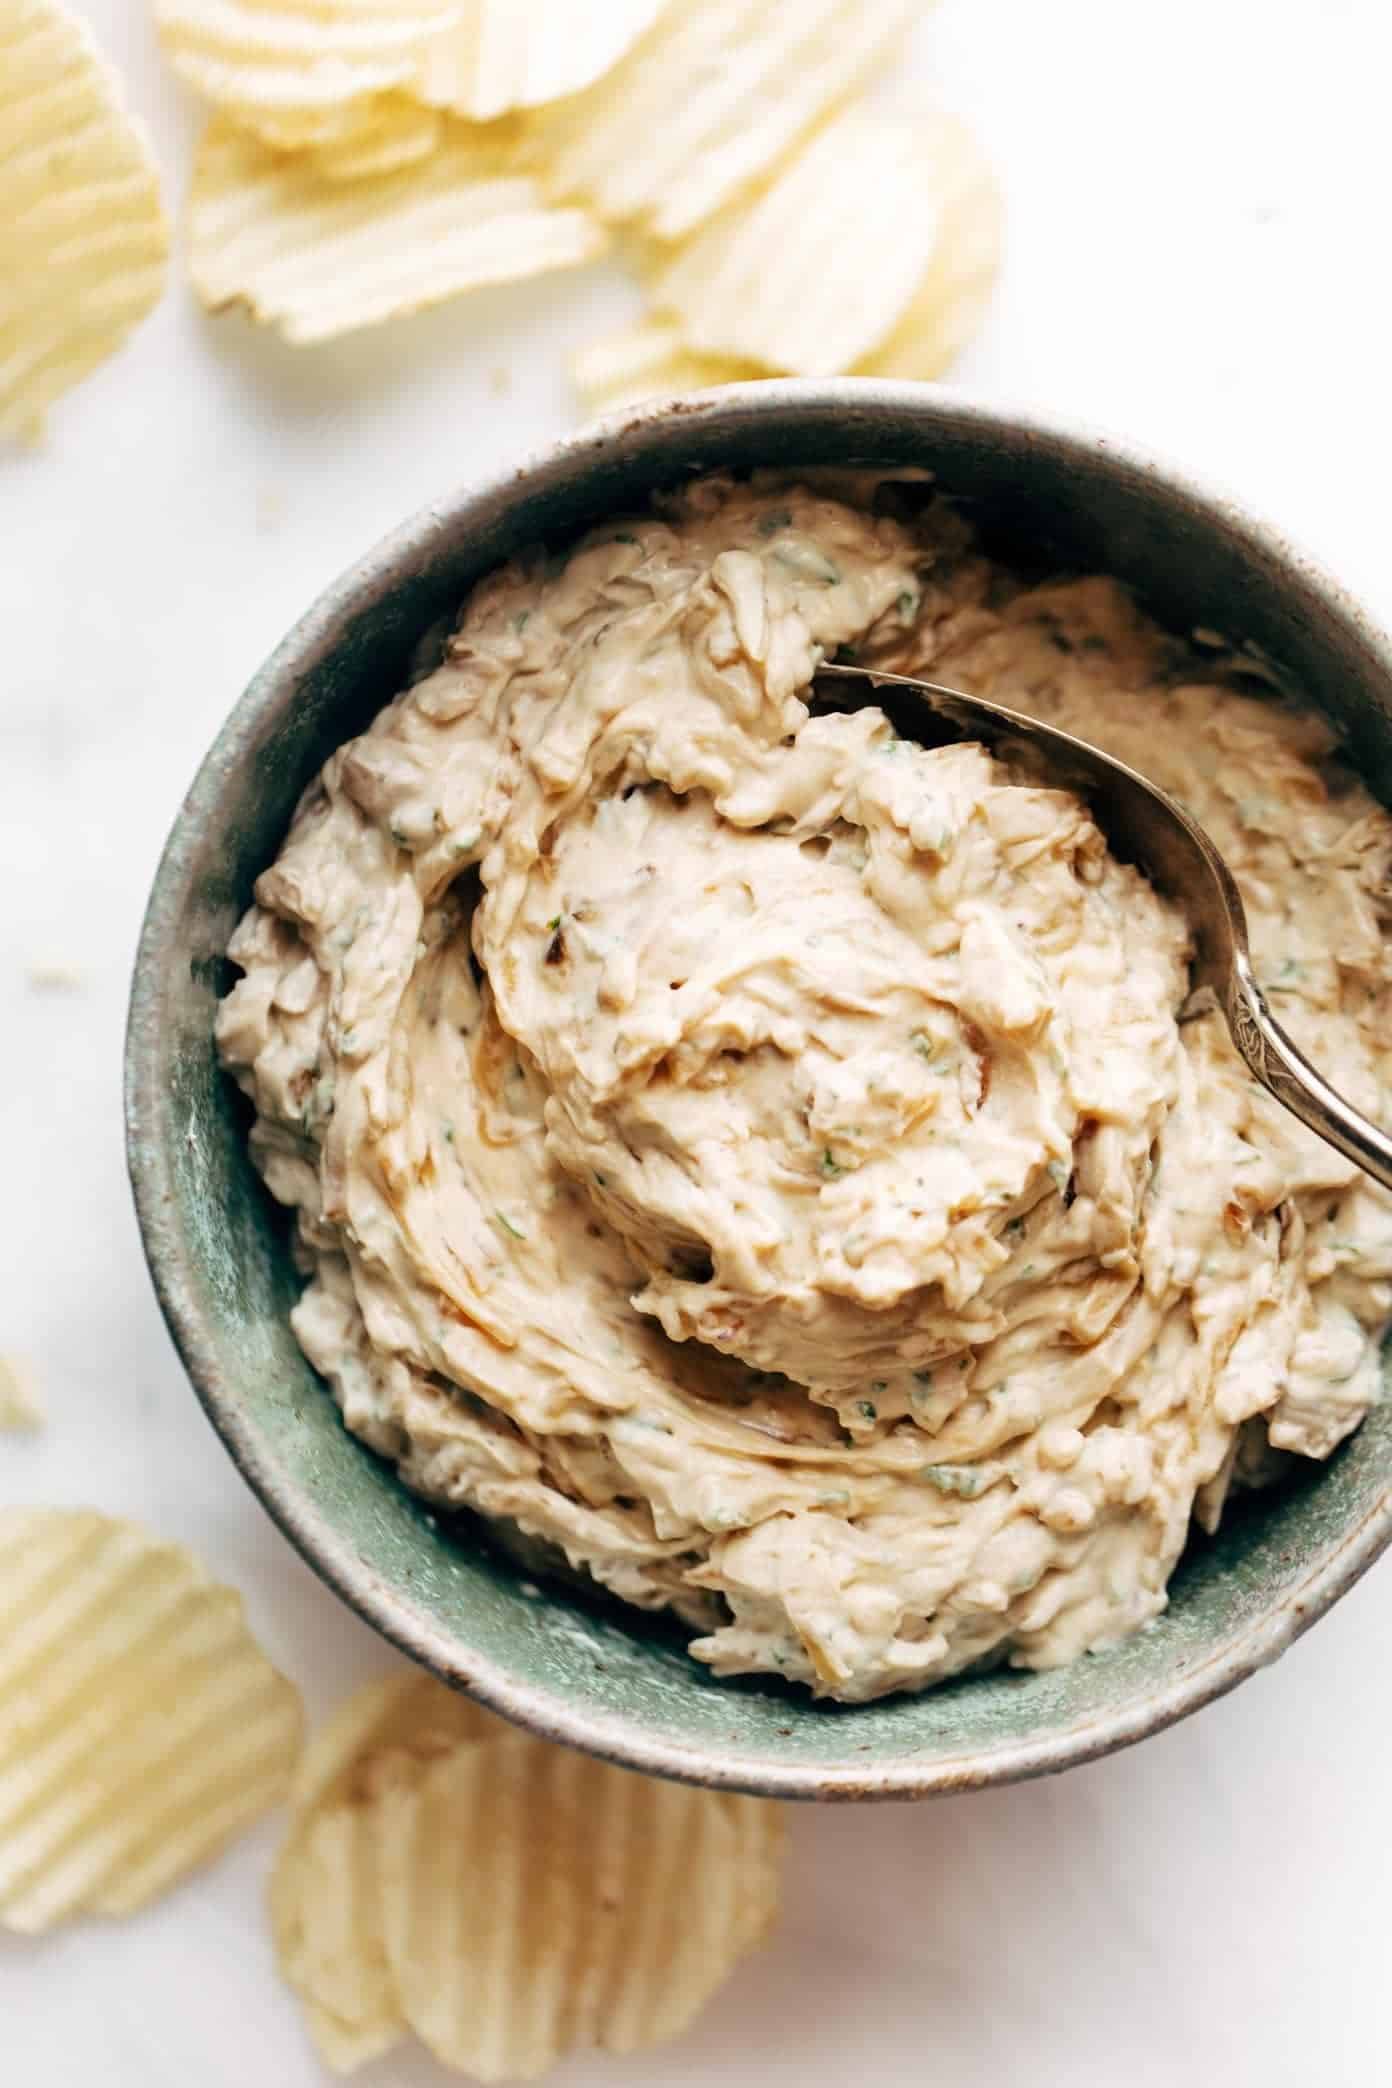 Caramelized Onion Dip with chips.